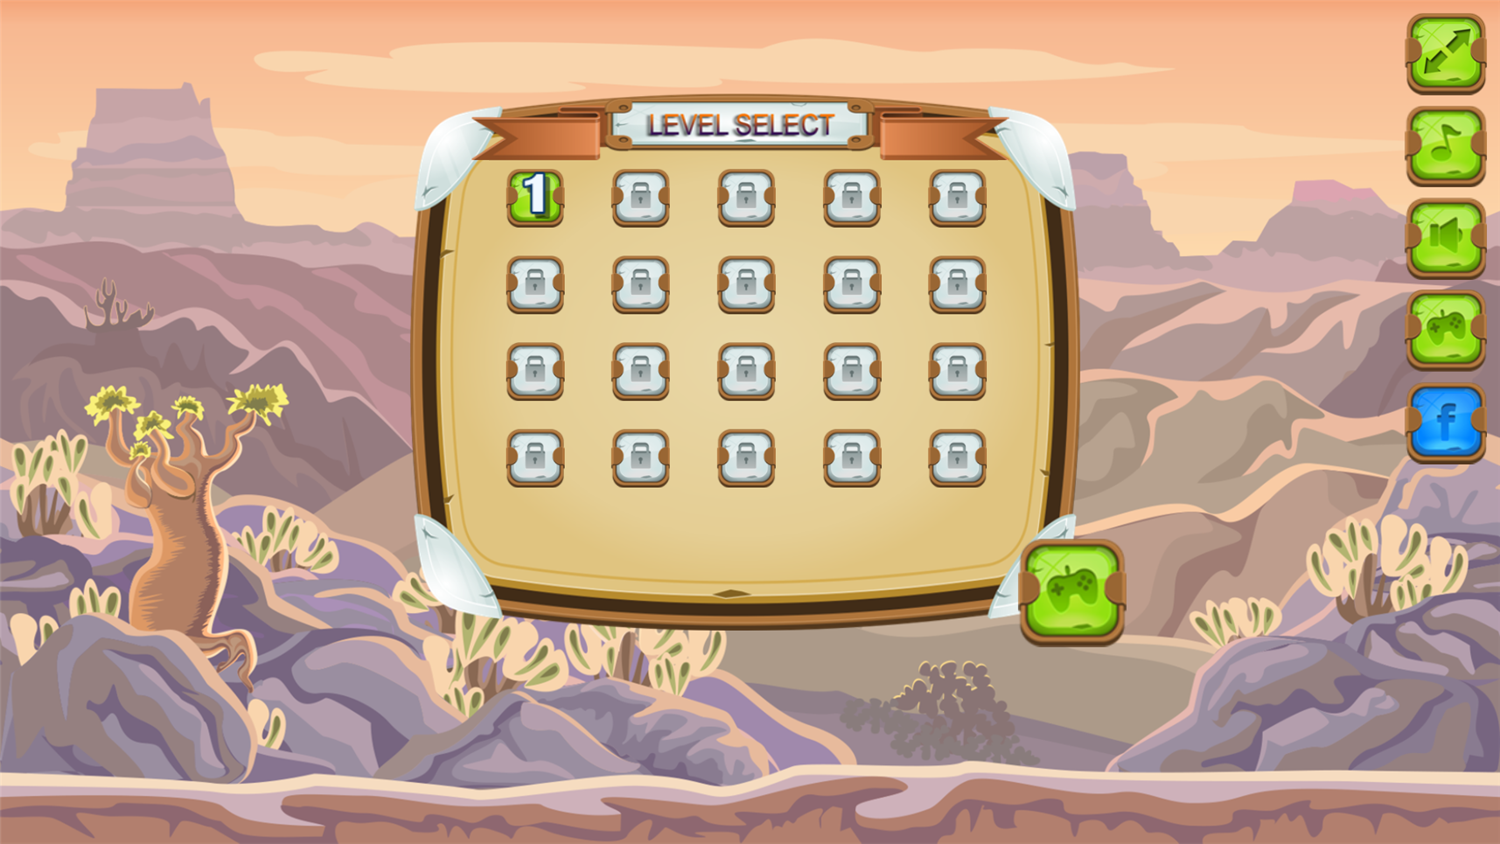 Toto Double Trouble Game Level Select Screenshot.